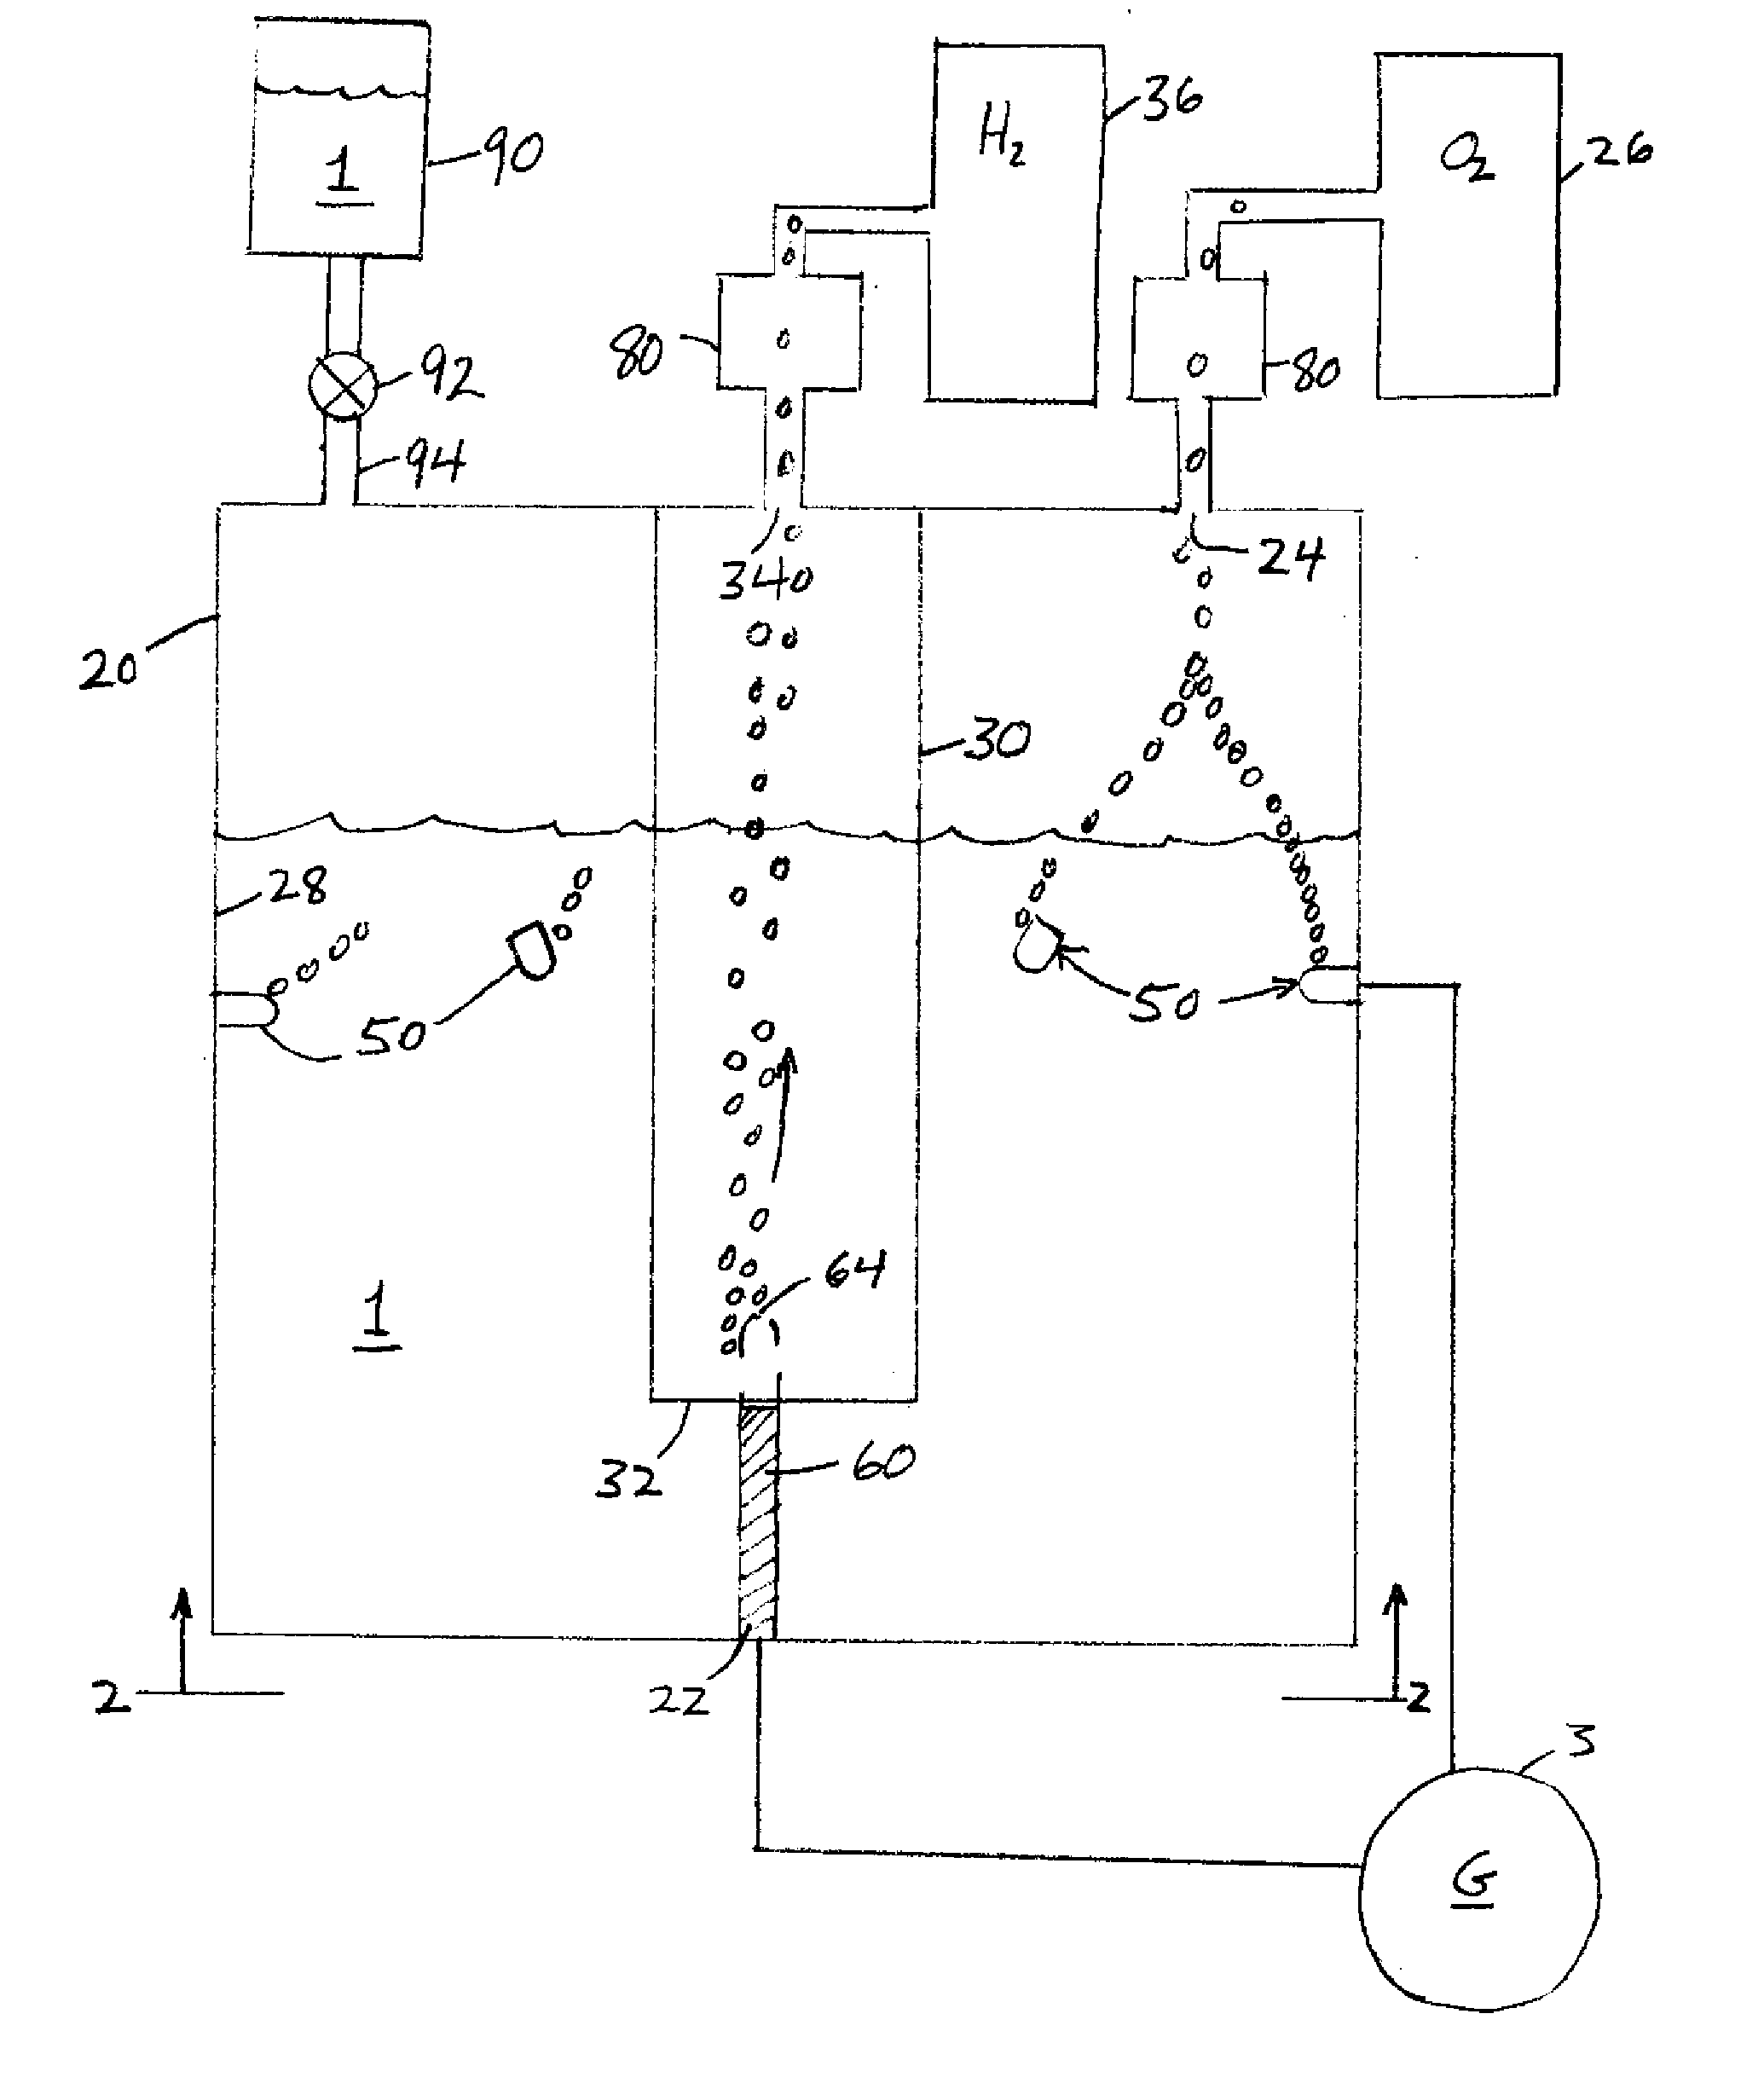 System and Method of Hydrogen and Oxygen Production